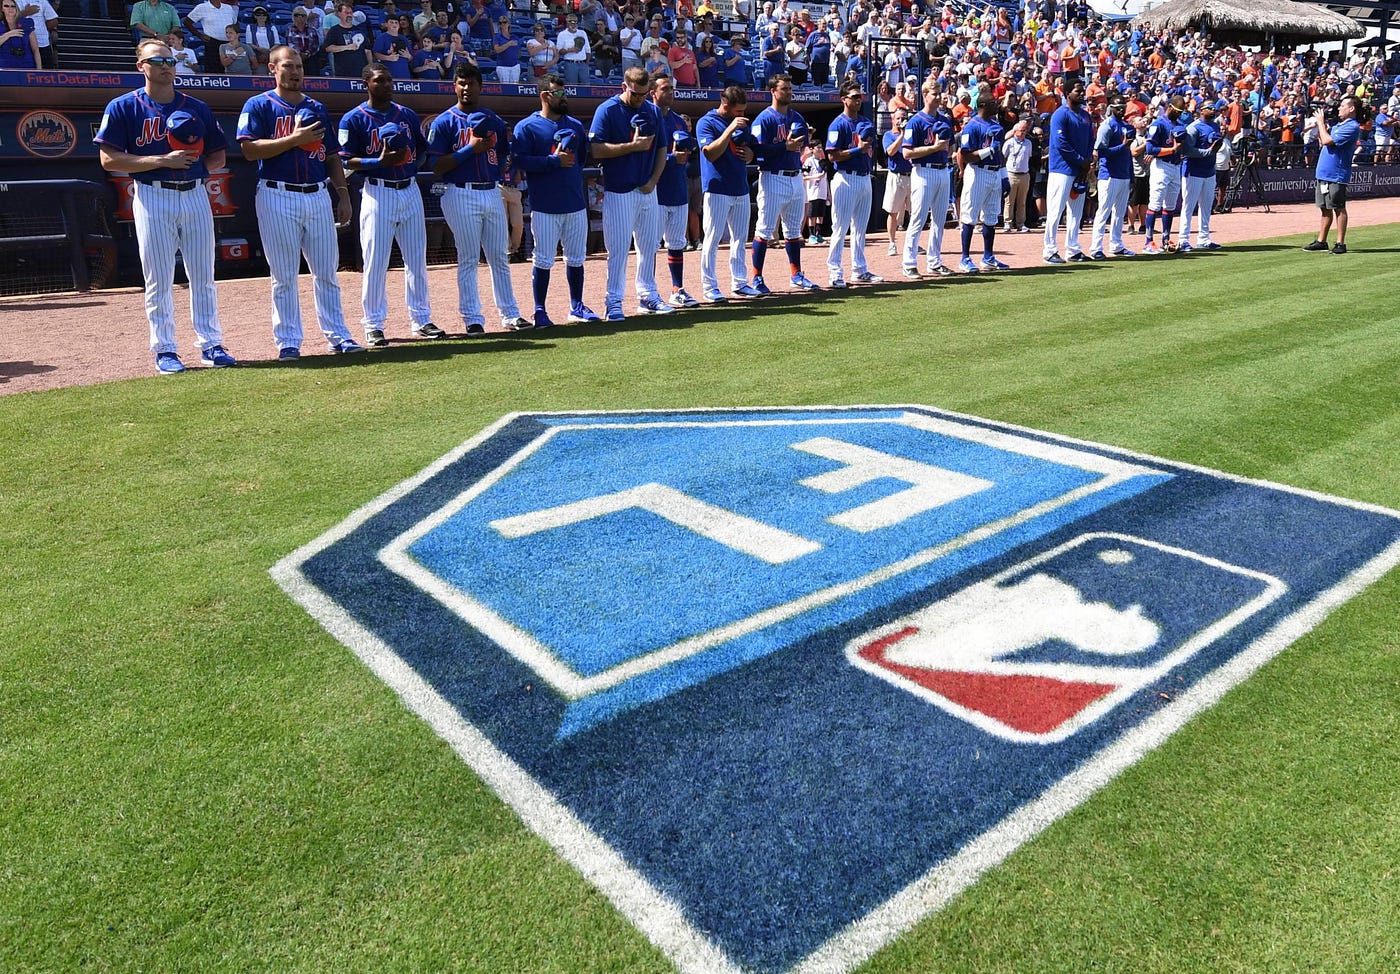 Mets Spring Training Home to be Named Clover Park, by New York Mets